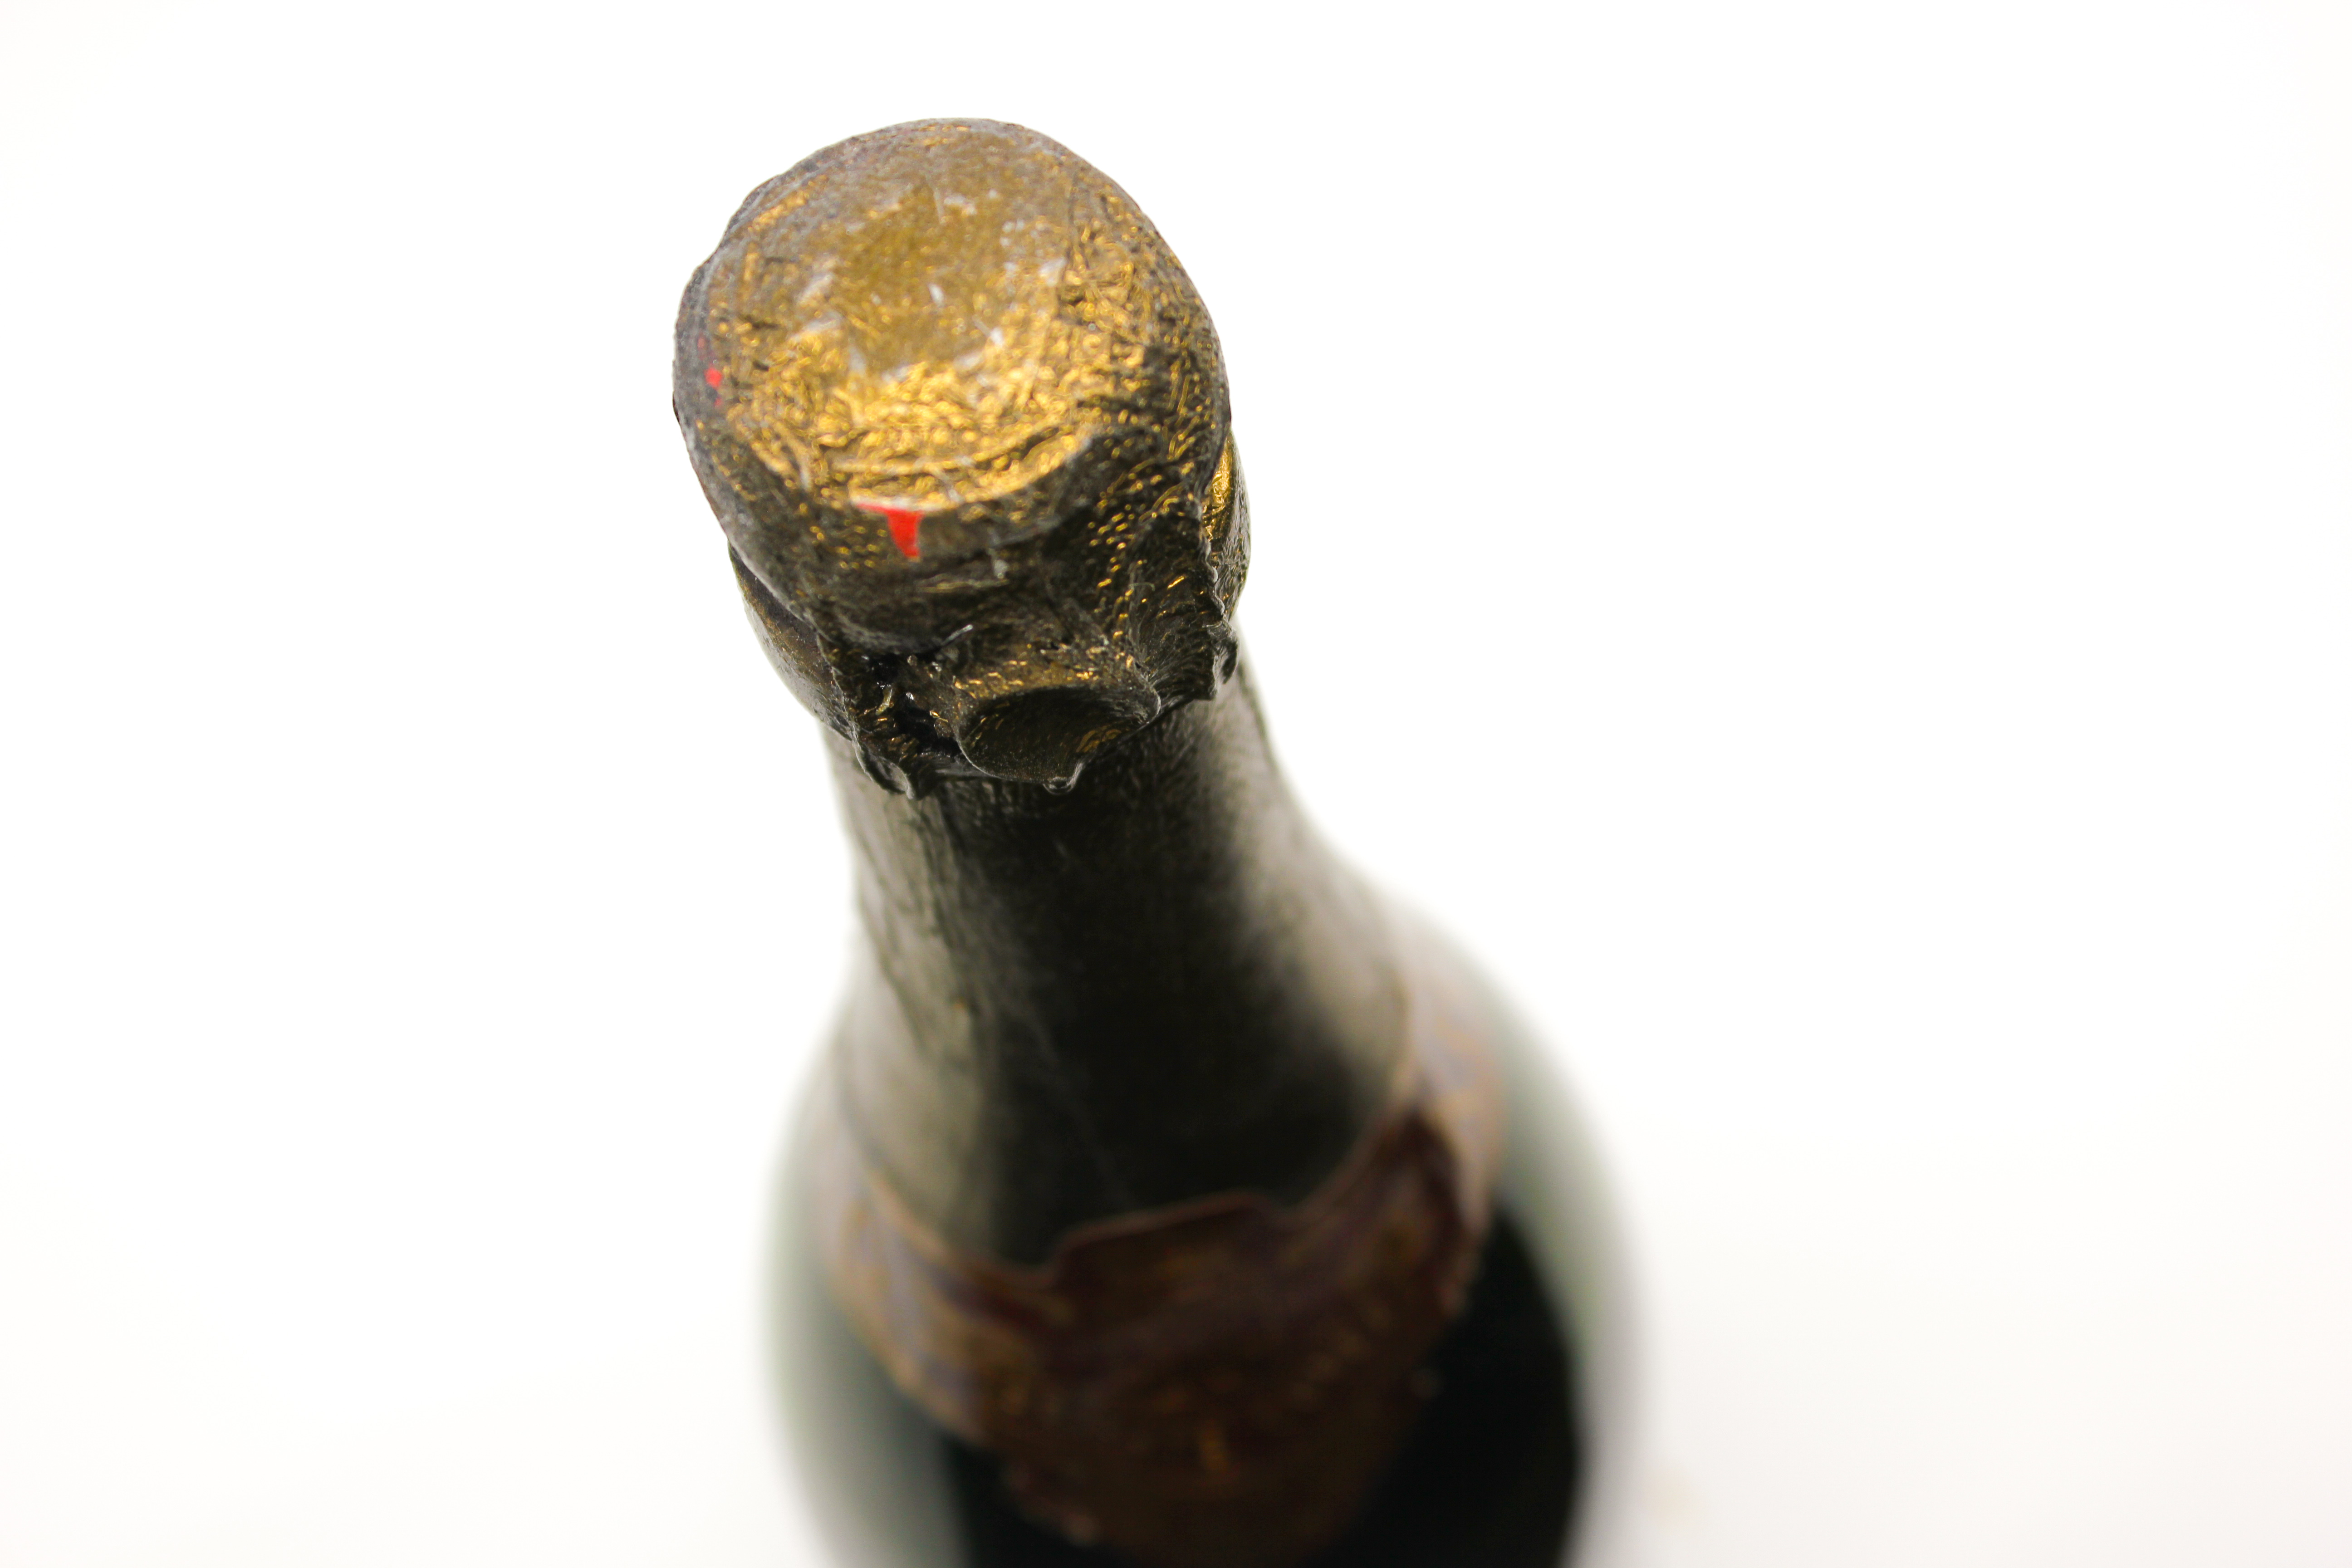 1964 Krug & Co Champagne Private Cuvée - Image 7 of 8